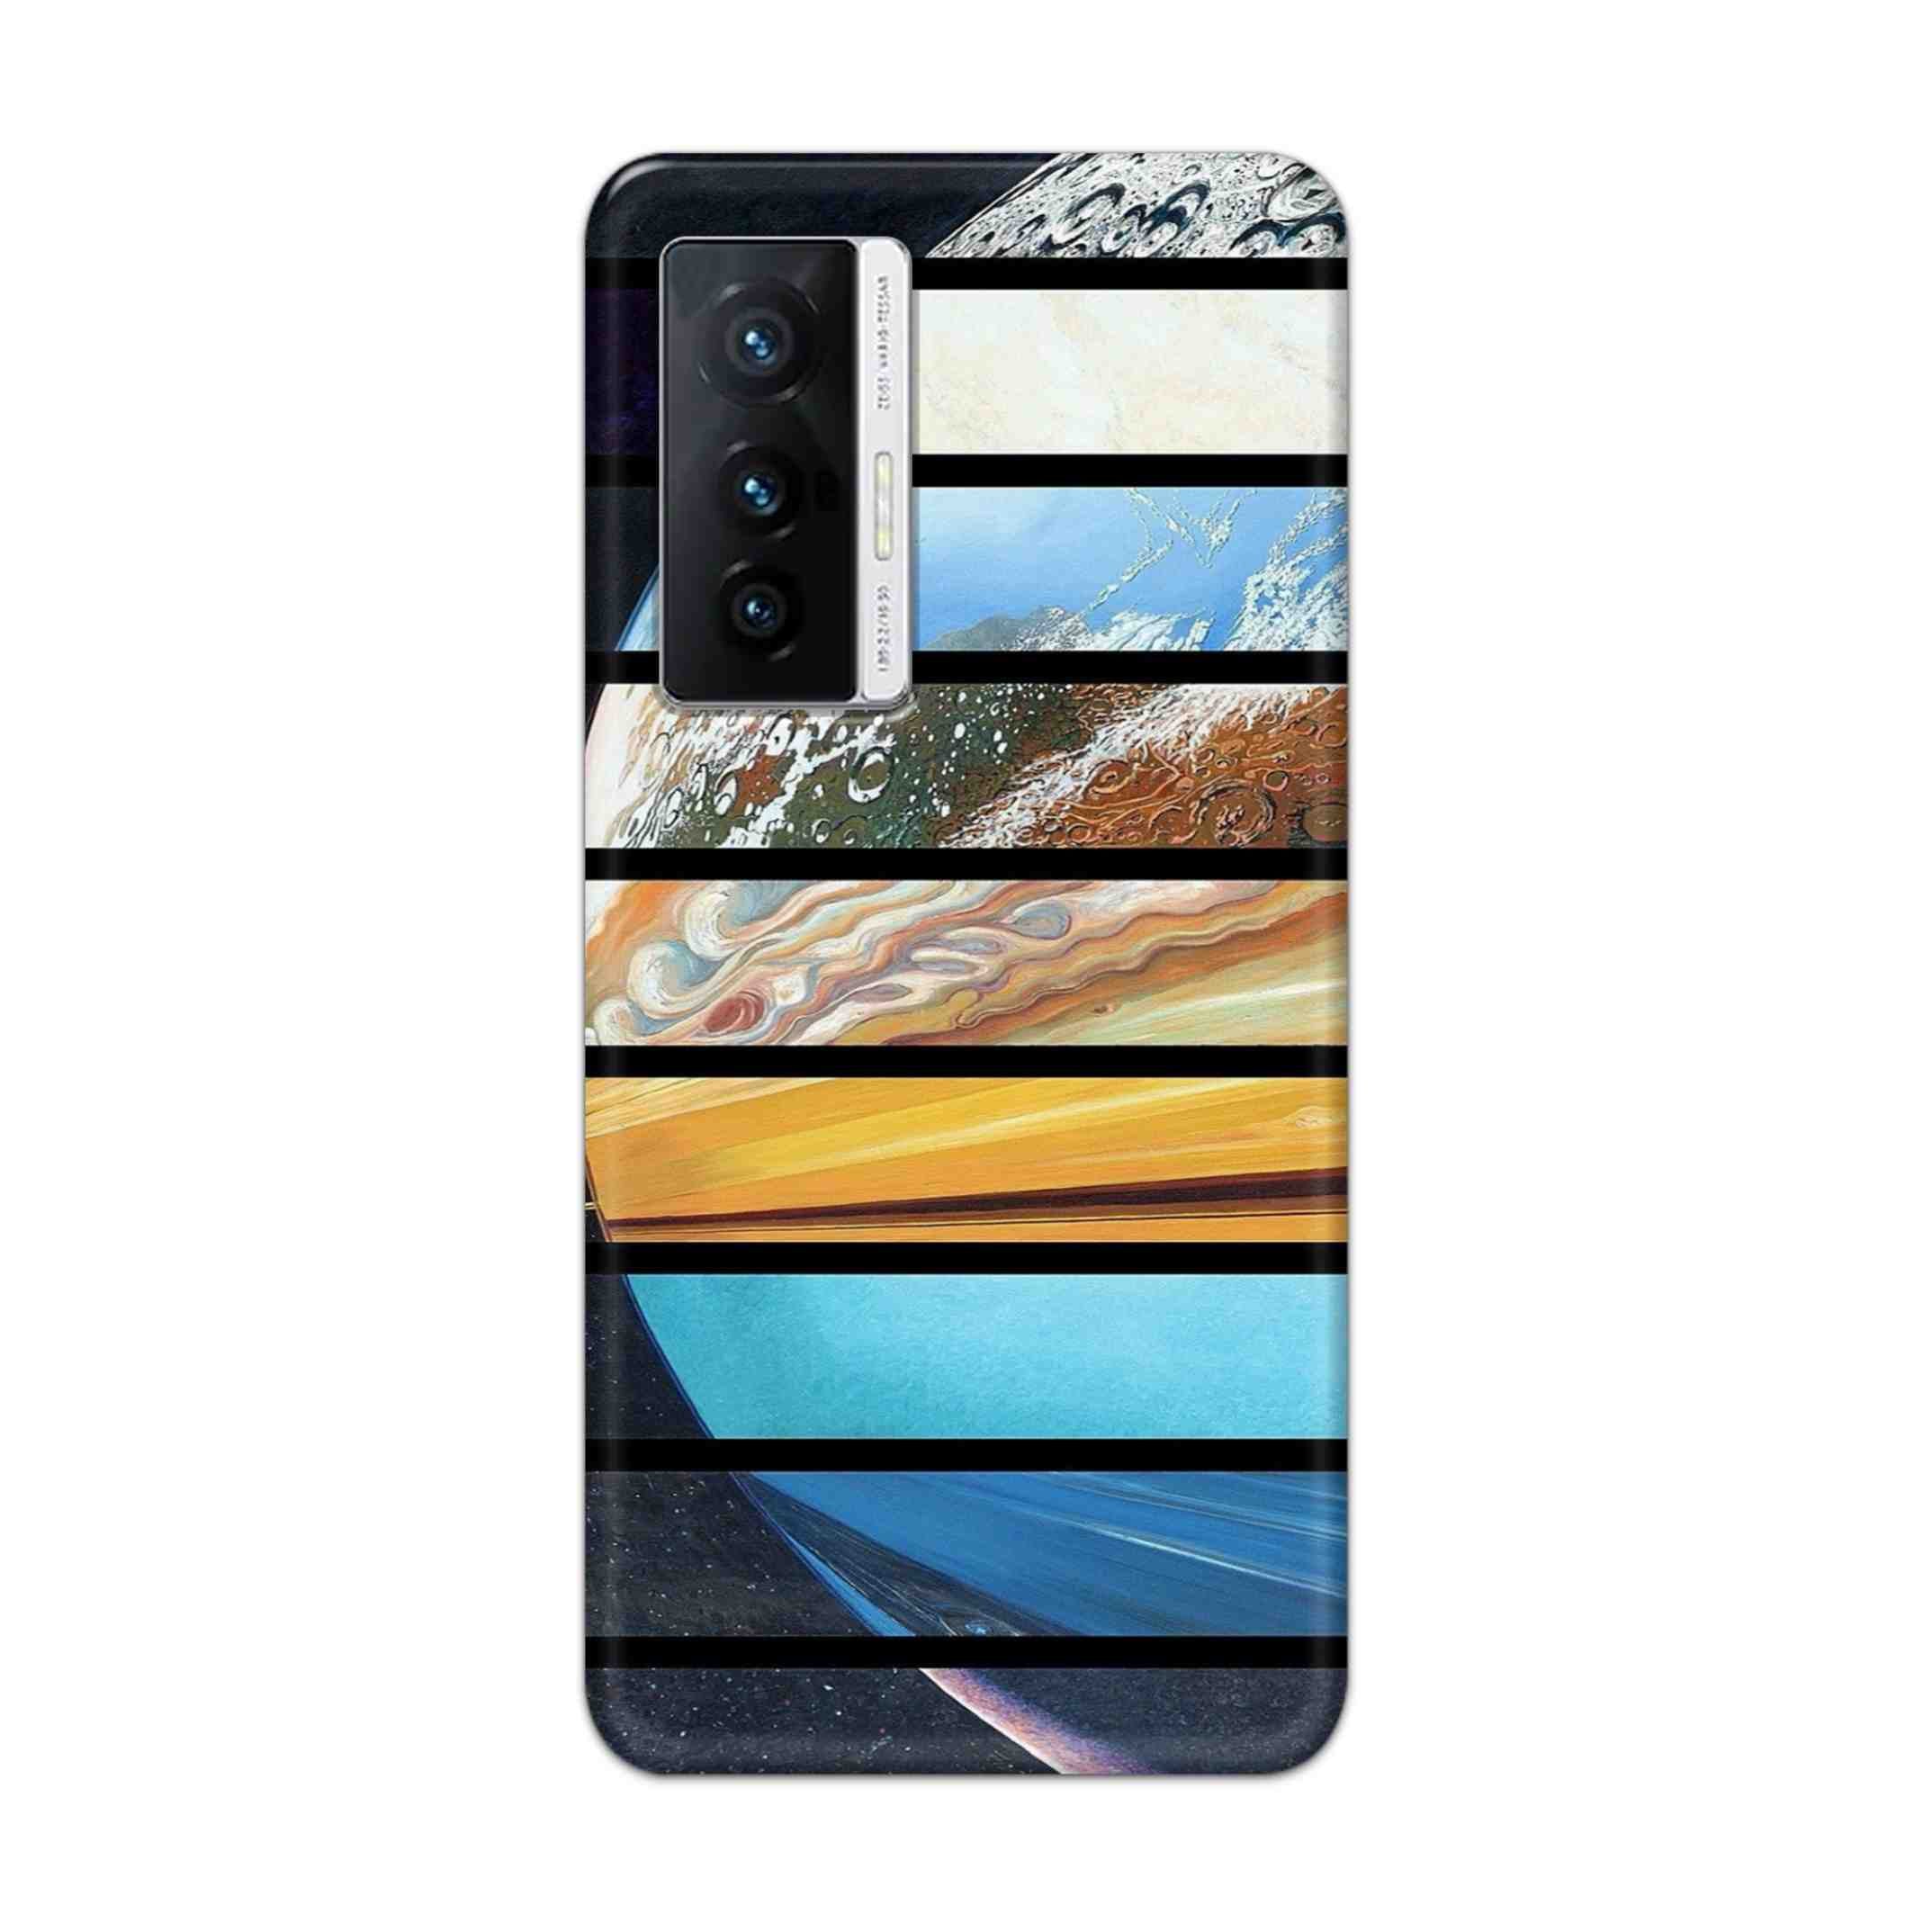 Buy Colourful Earth Hard Back Mobile Phone Case Cover For Vivo X70 Online